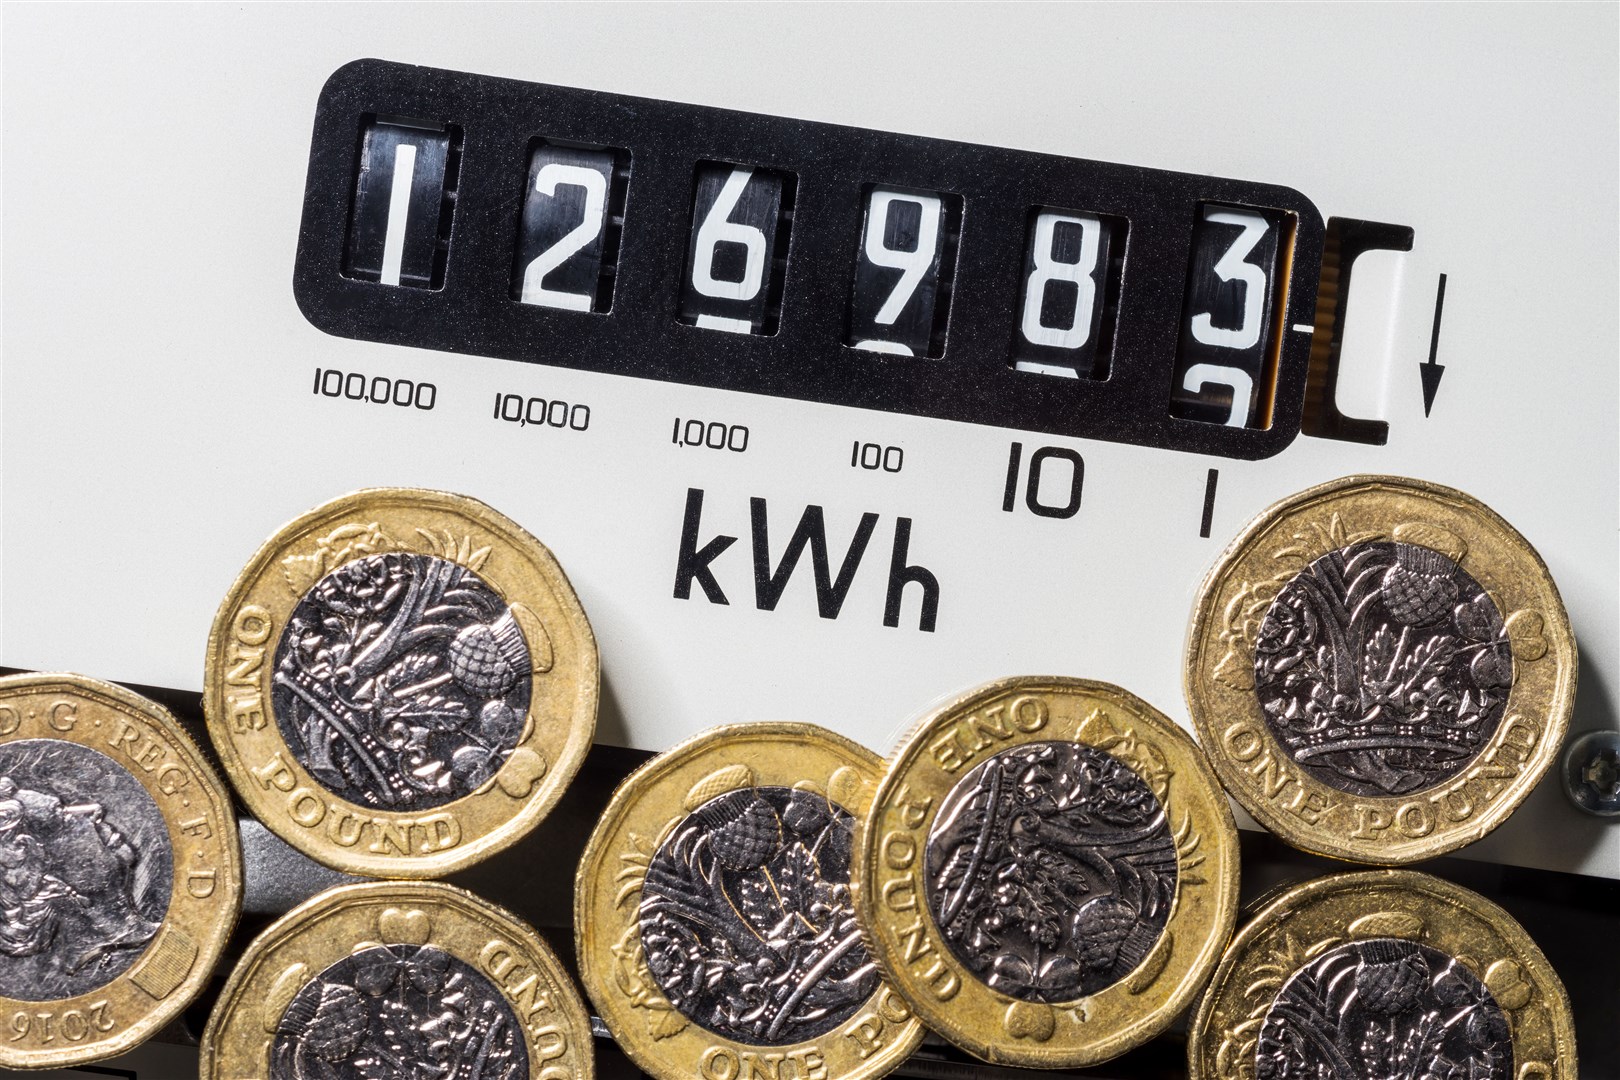 Charities are among the organisations which can apply for help under the Energy Bills Discount Scheme.